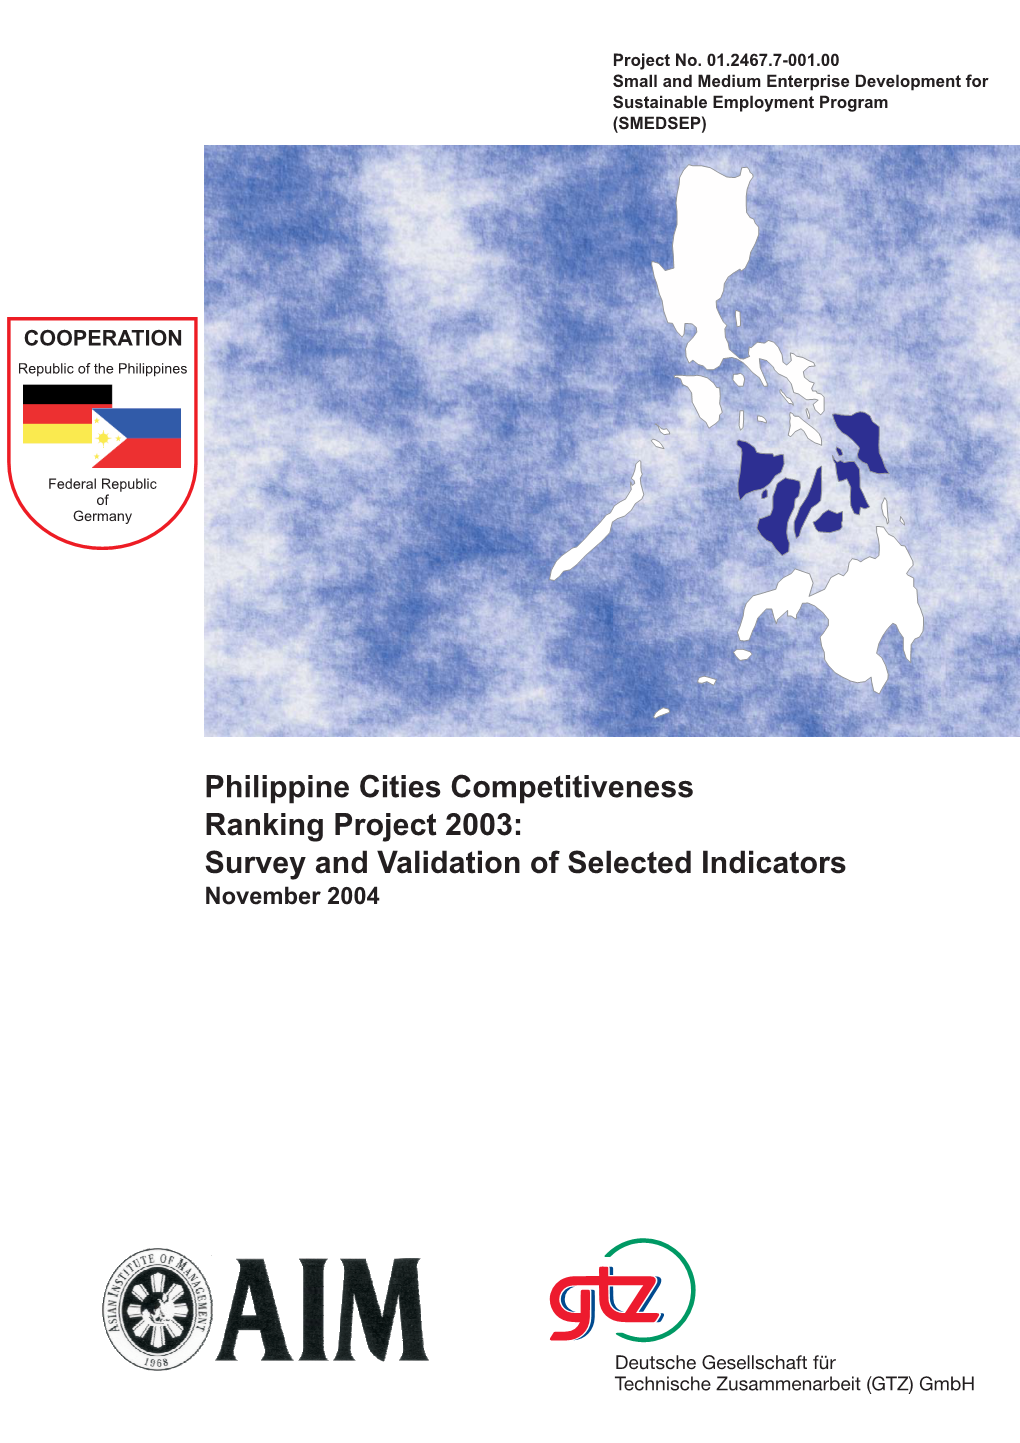 Philippine Cities Competitiveness Ranking Project 2003: Survey and Validation of Selected Indicators November 2004 Prepared/ Written By: Prof